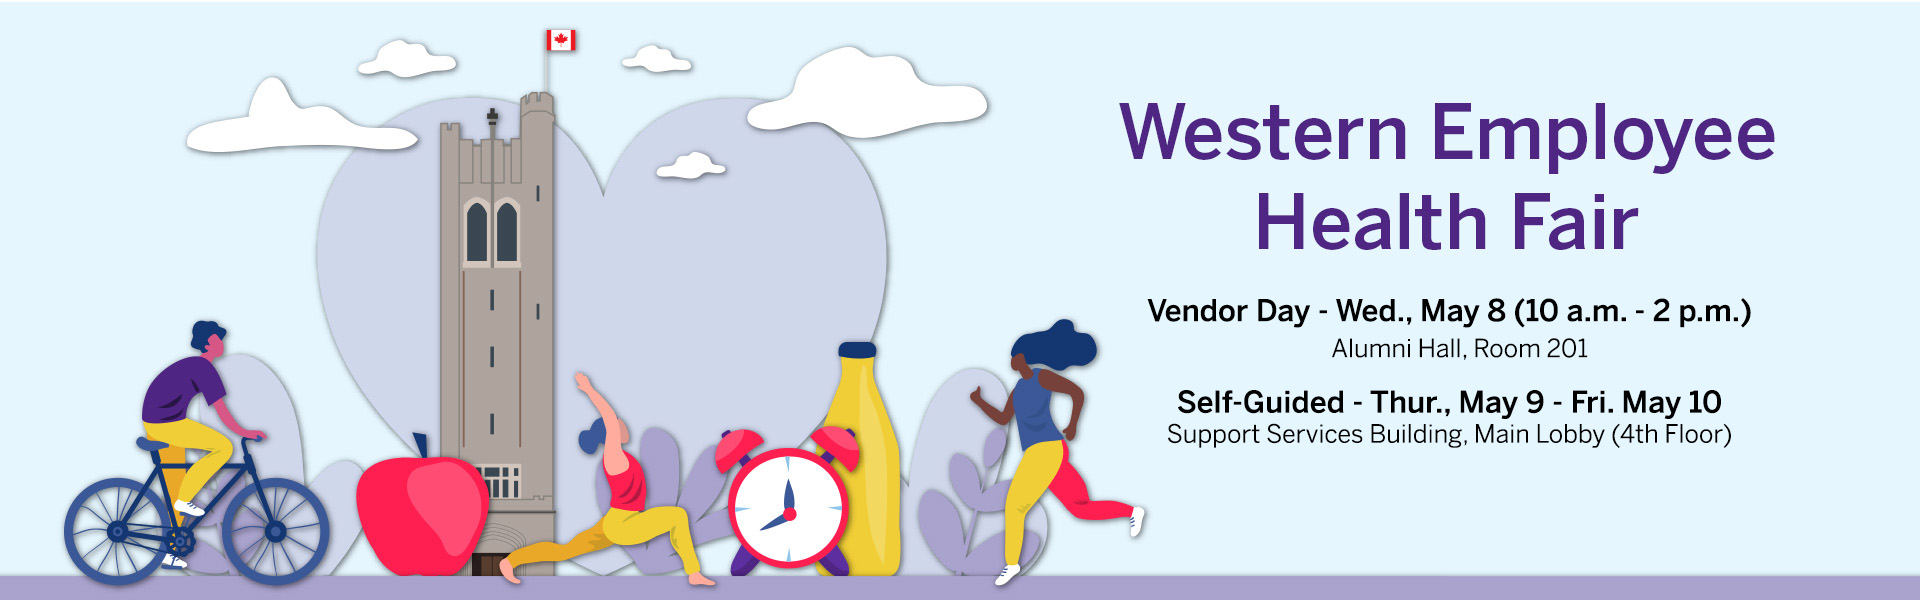 Western Employee Health Fair, vendor day - May 8 (10am to 2 pm) at Alumni Hall, Room 201; Self-Guided - May 9-10, Support Services Building, Main lobby (4th floor)